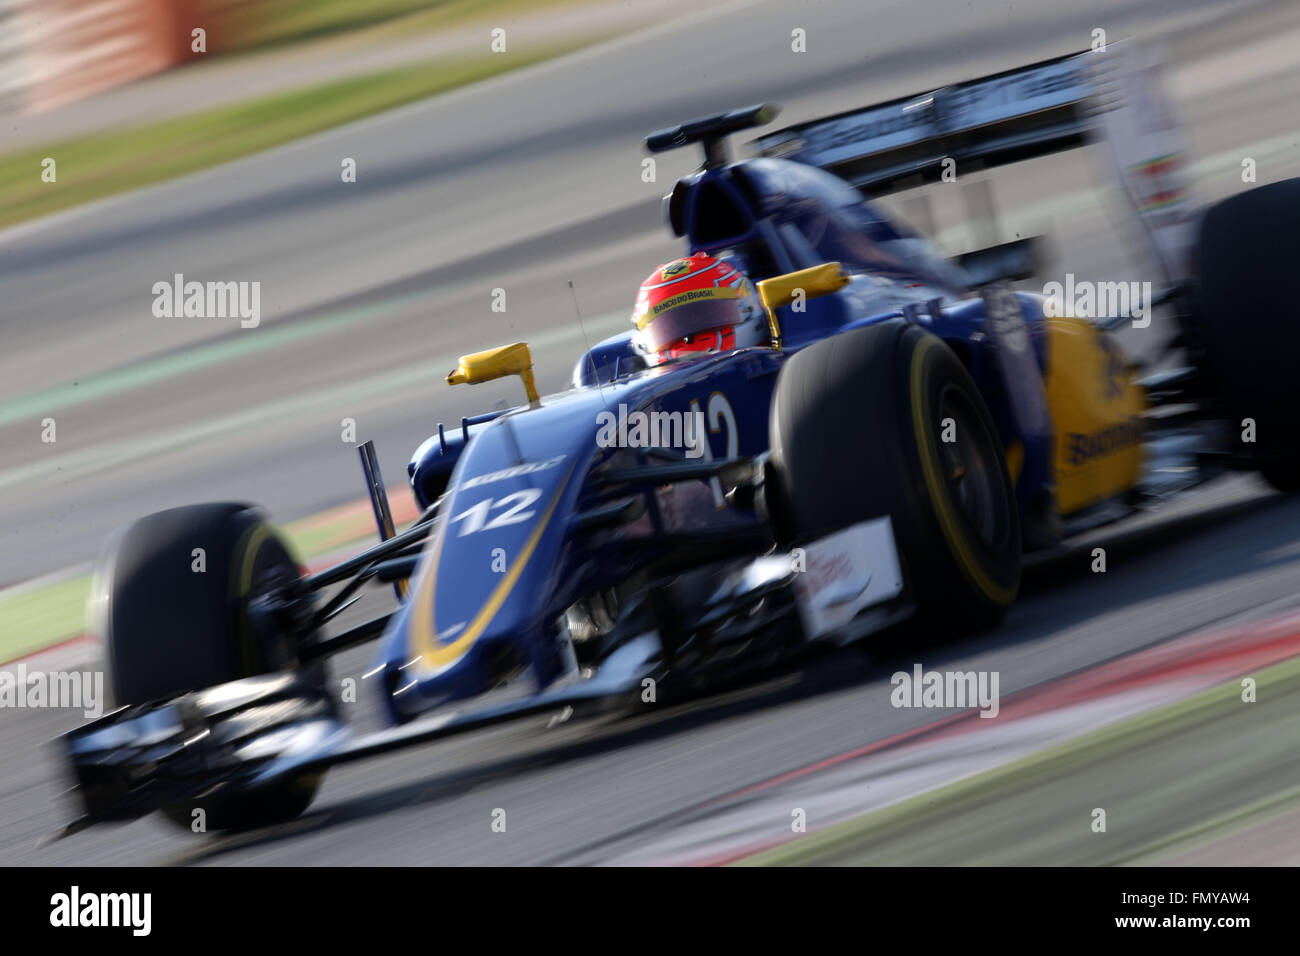 Brazilian Formula One driver Felipe Nasr of Sauber steers his car during the training session for the upcoming Formula One season at the Circuit de Barcelona - Catalunya in Barcelona, Spain, 24 February 2016. Photo: Jens Buettner/dpa Stock Photo